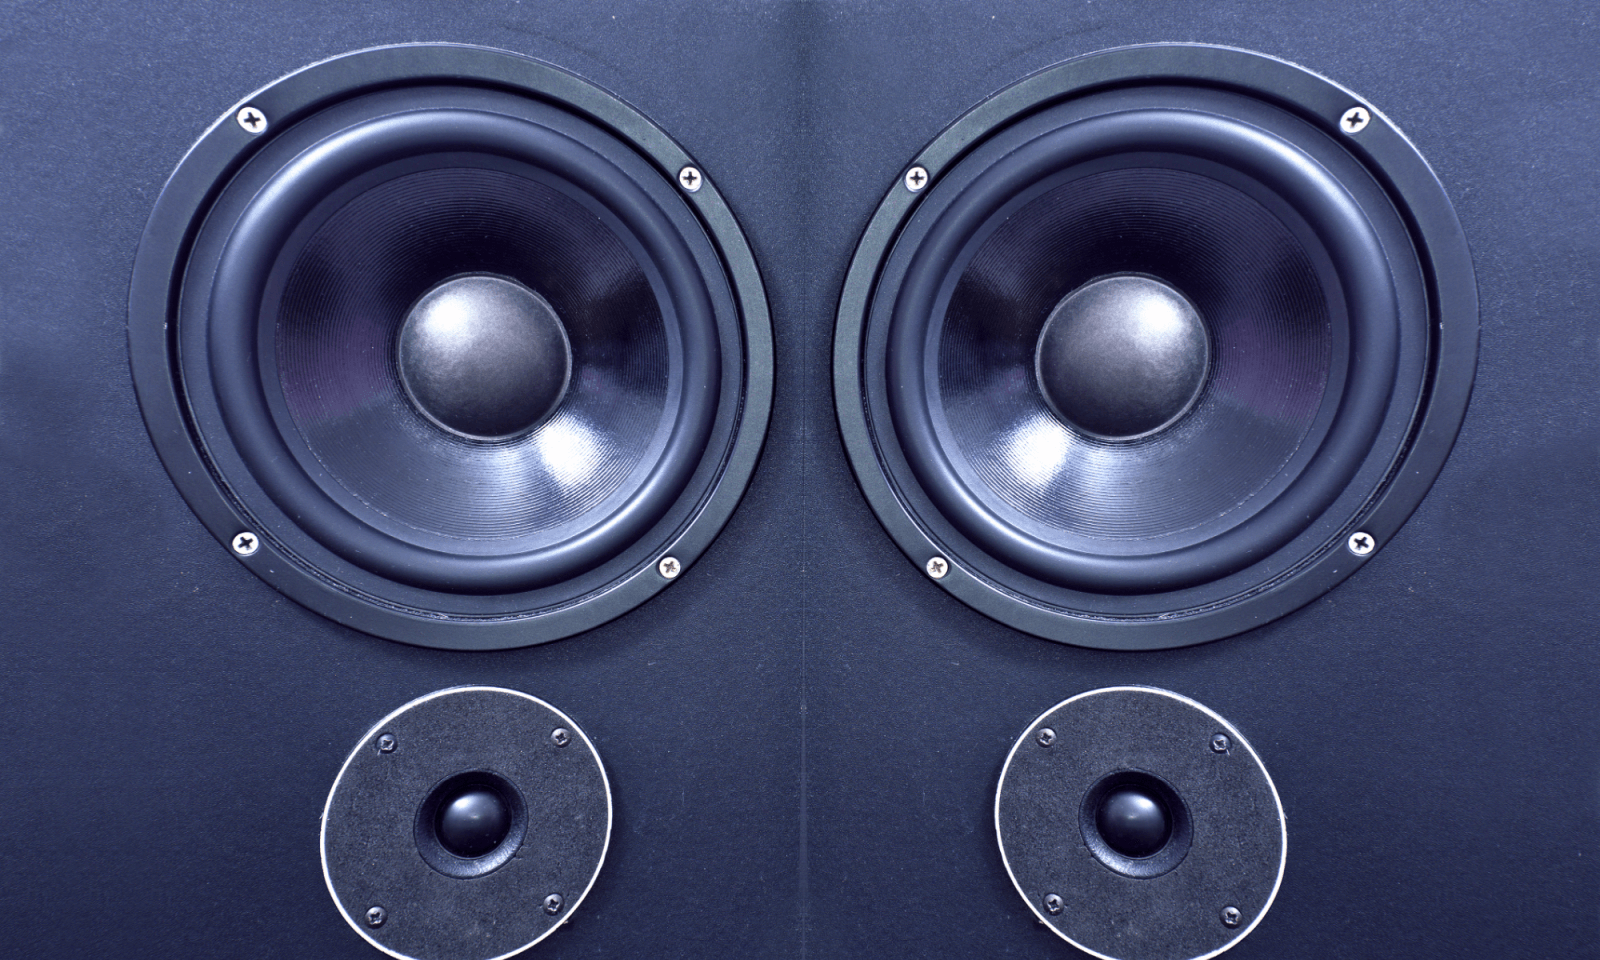 How To Make A Wider Stereo Sound